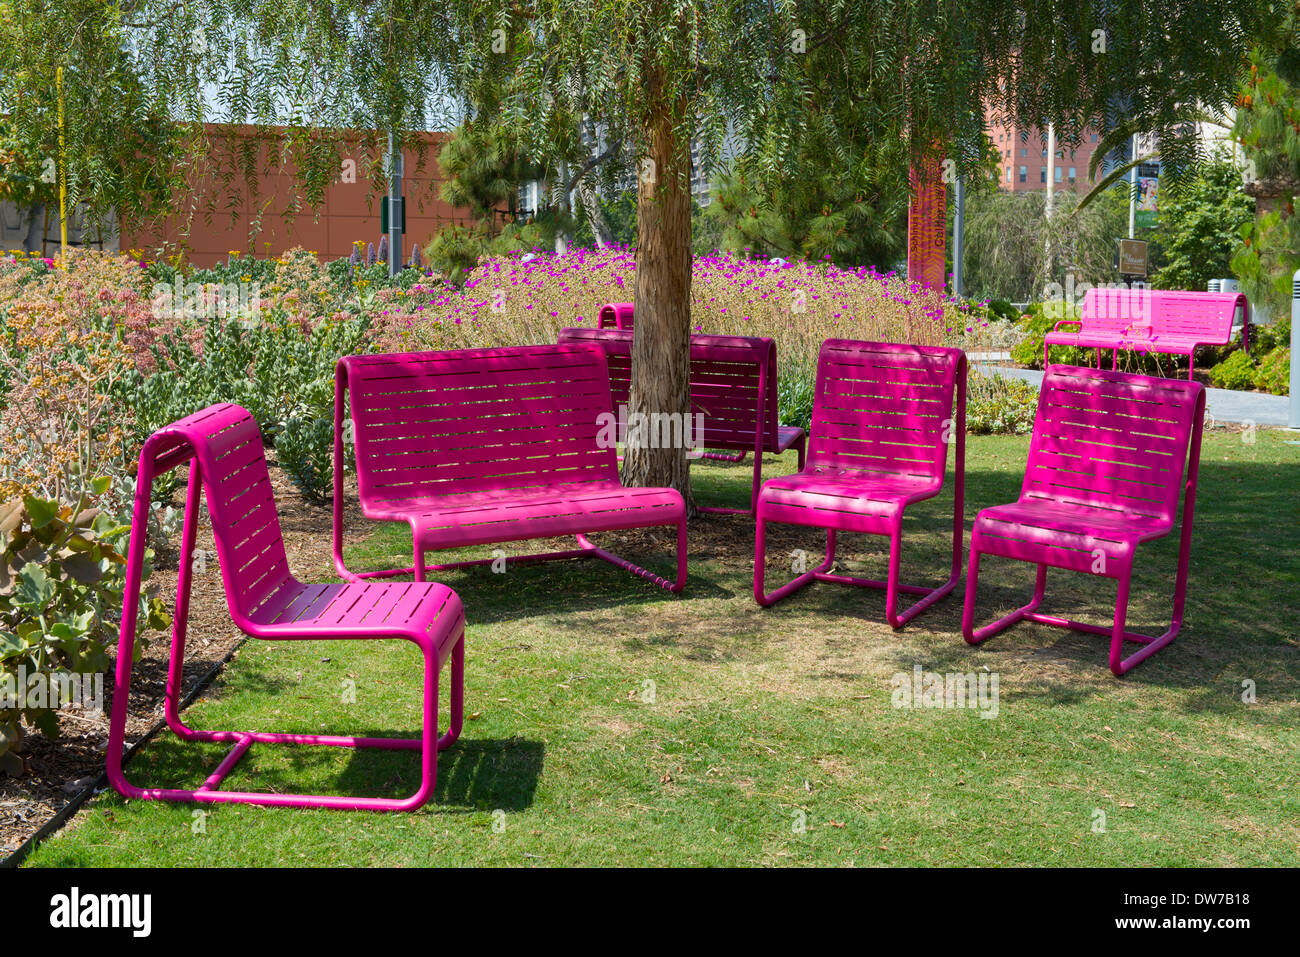 Pink chairs in a park Los Angeles Stock Photo